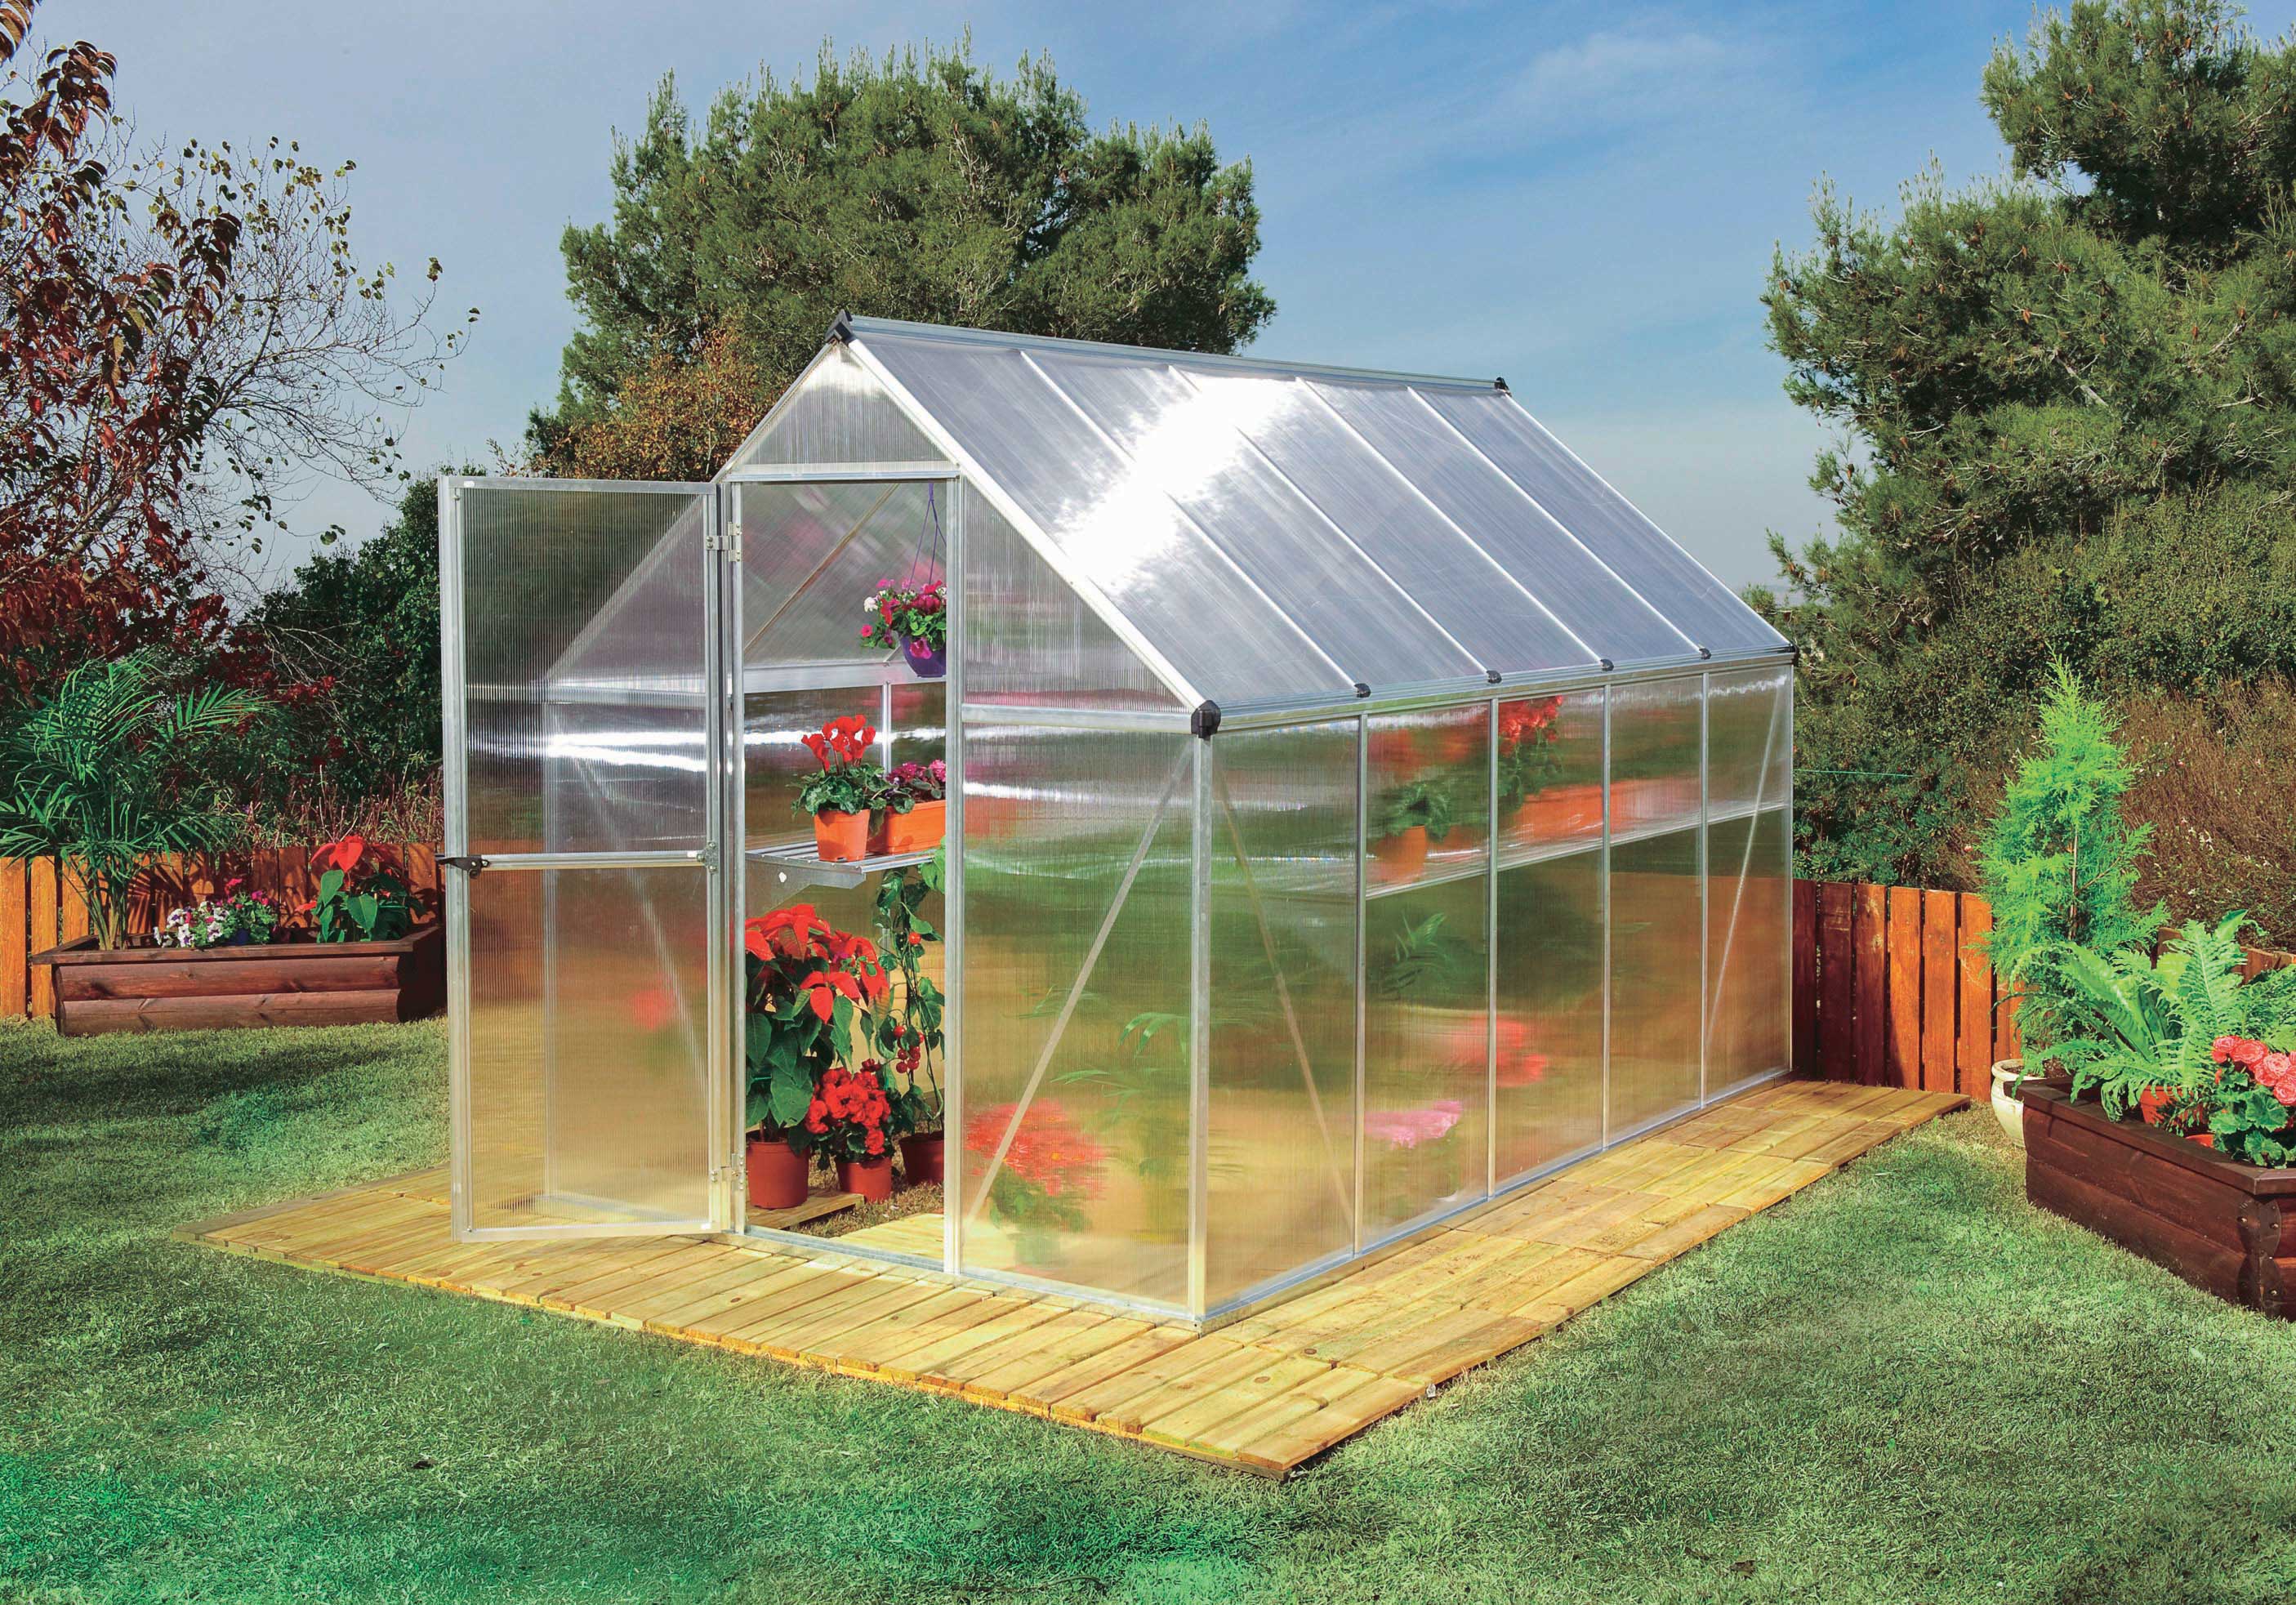 Mythos Opaque Polycarbonate Greenhouse helps maintain ideal temperature lev...